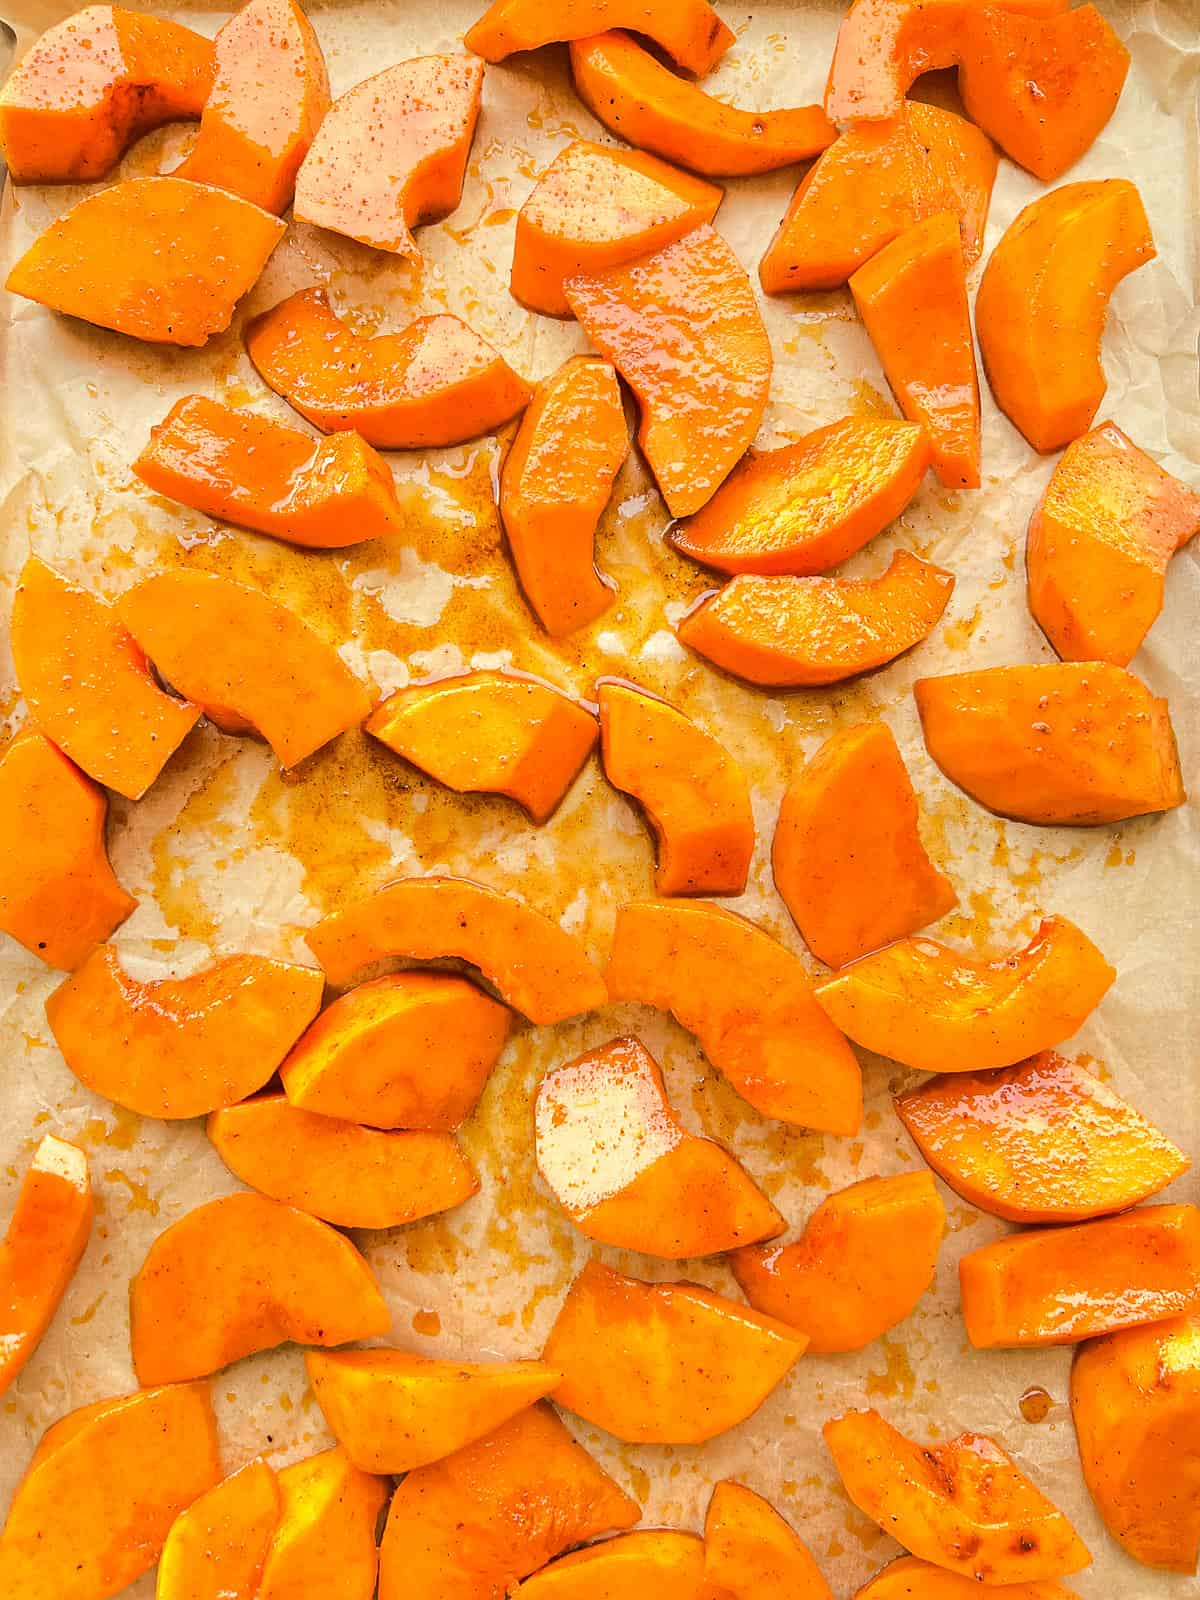 An image of prepared squash before it is roasted on a roasting tray.